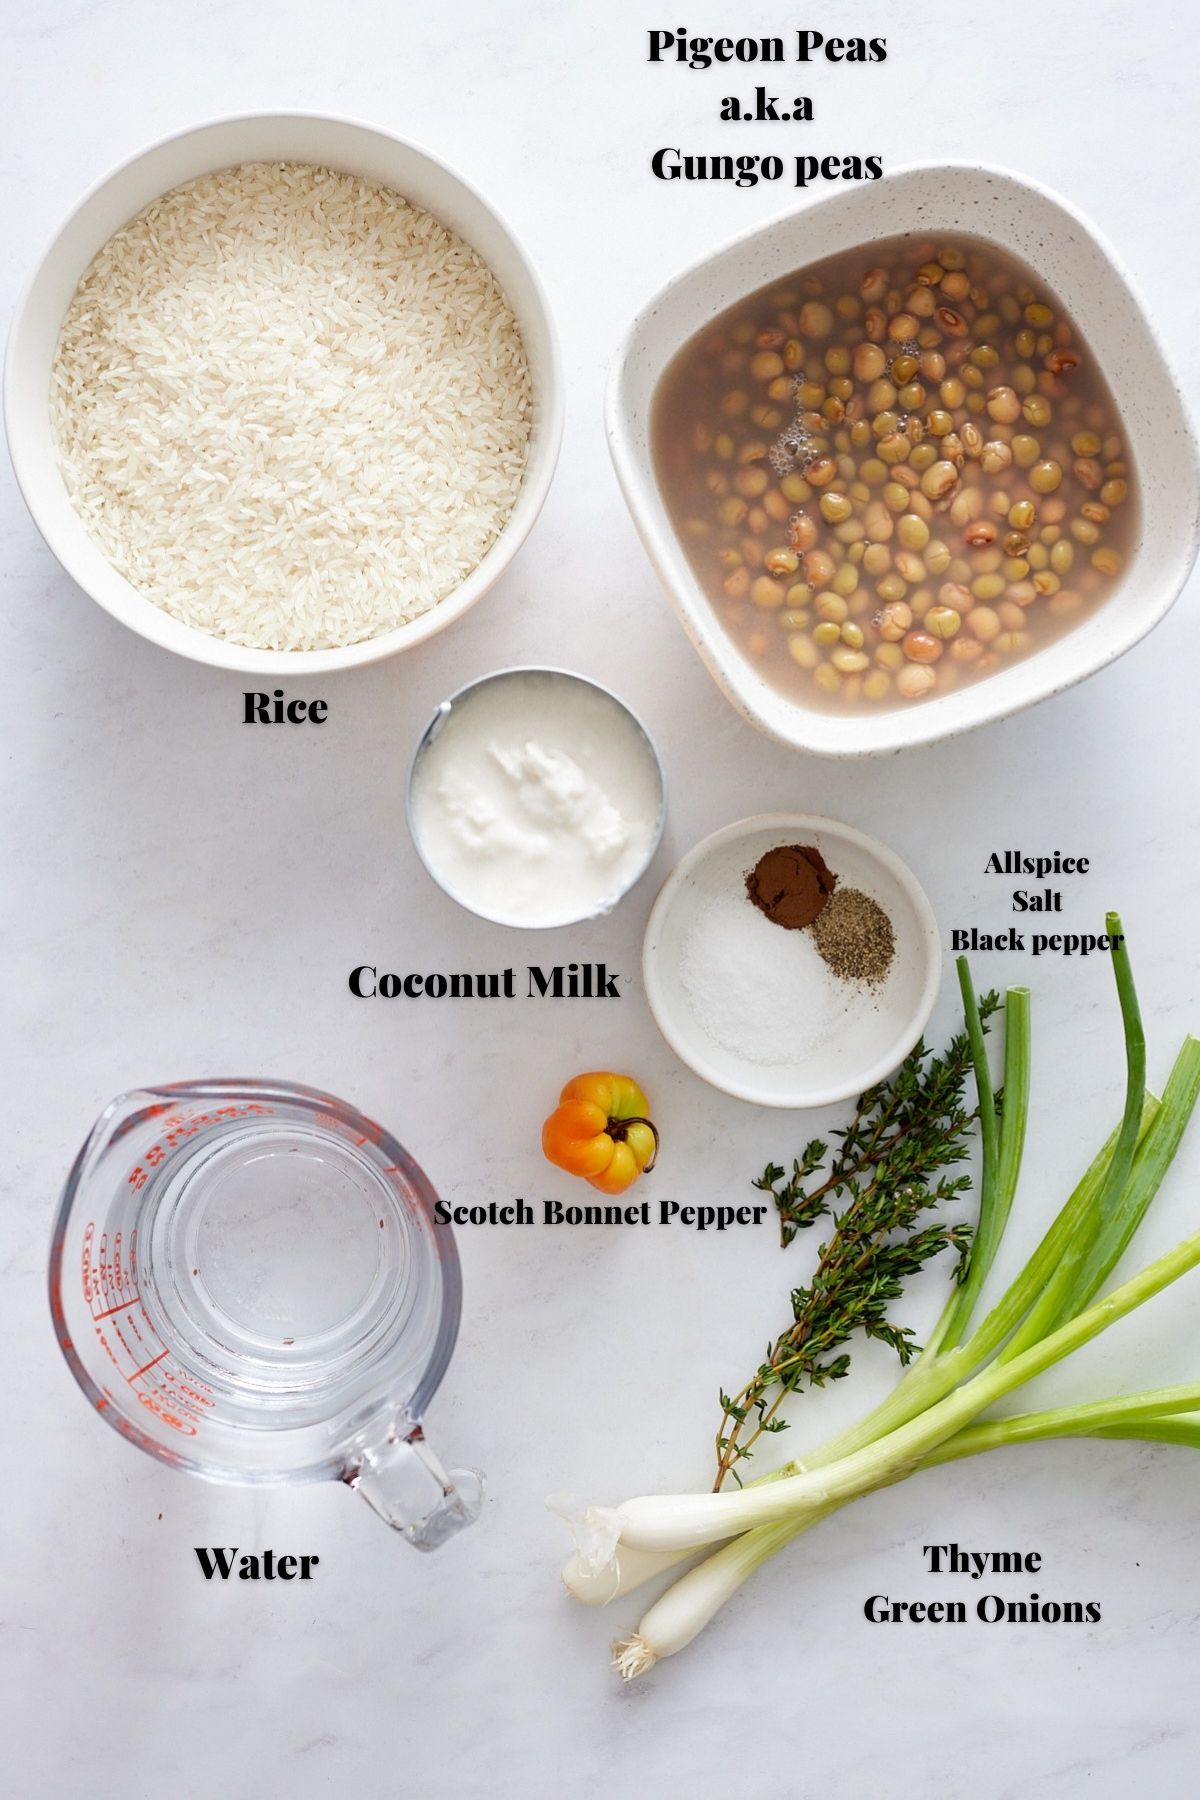 ingredients for gungo peas and rice on white background